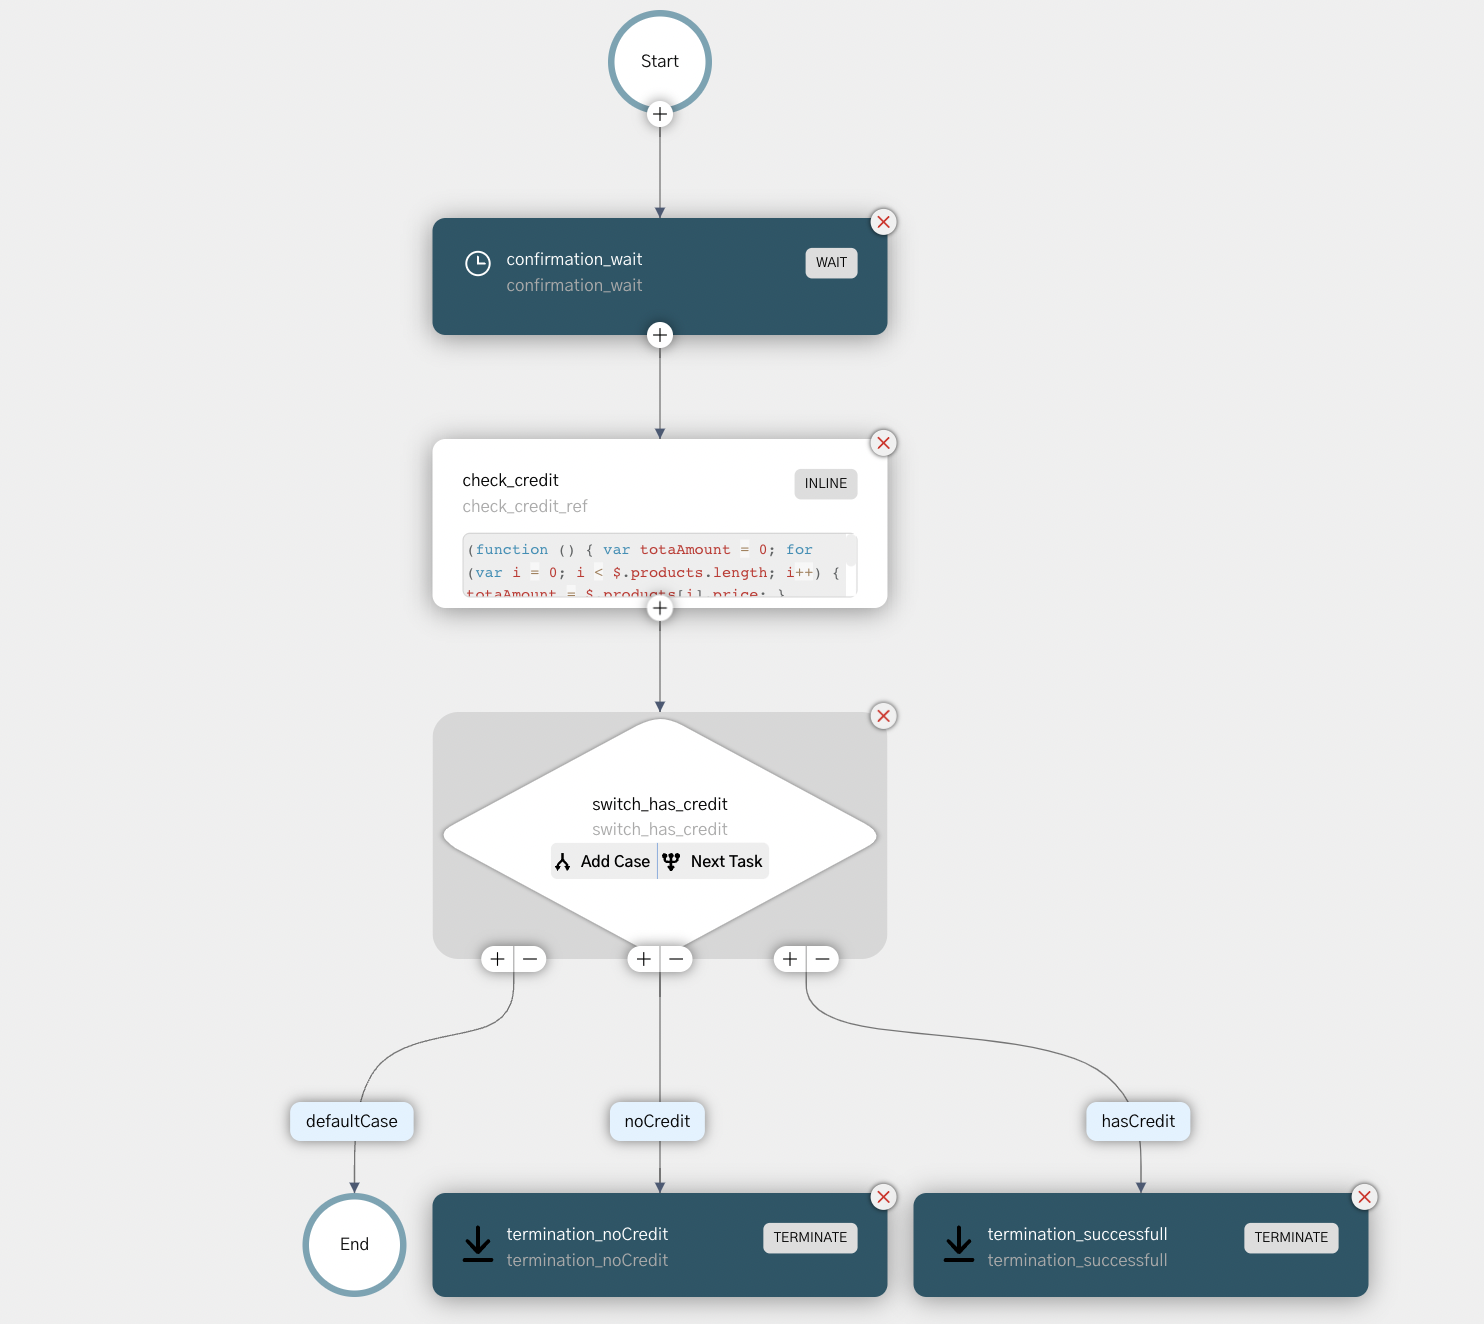 Checkout process workflow in Conductor